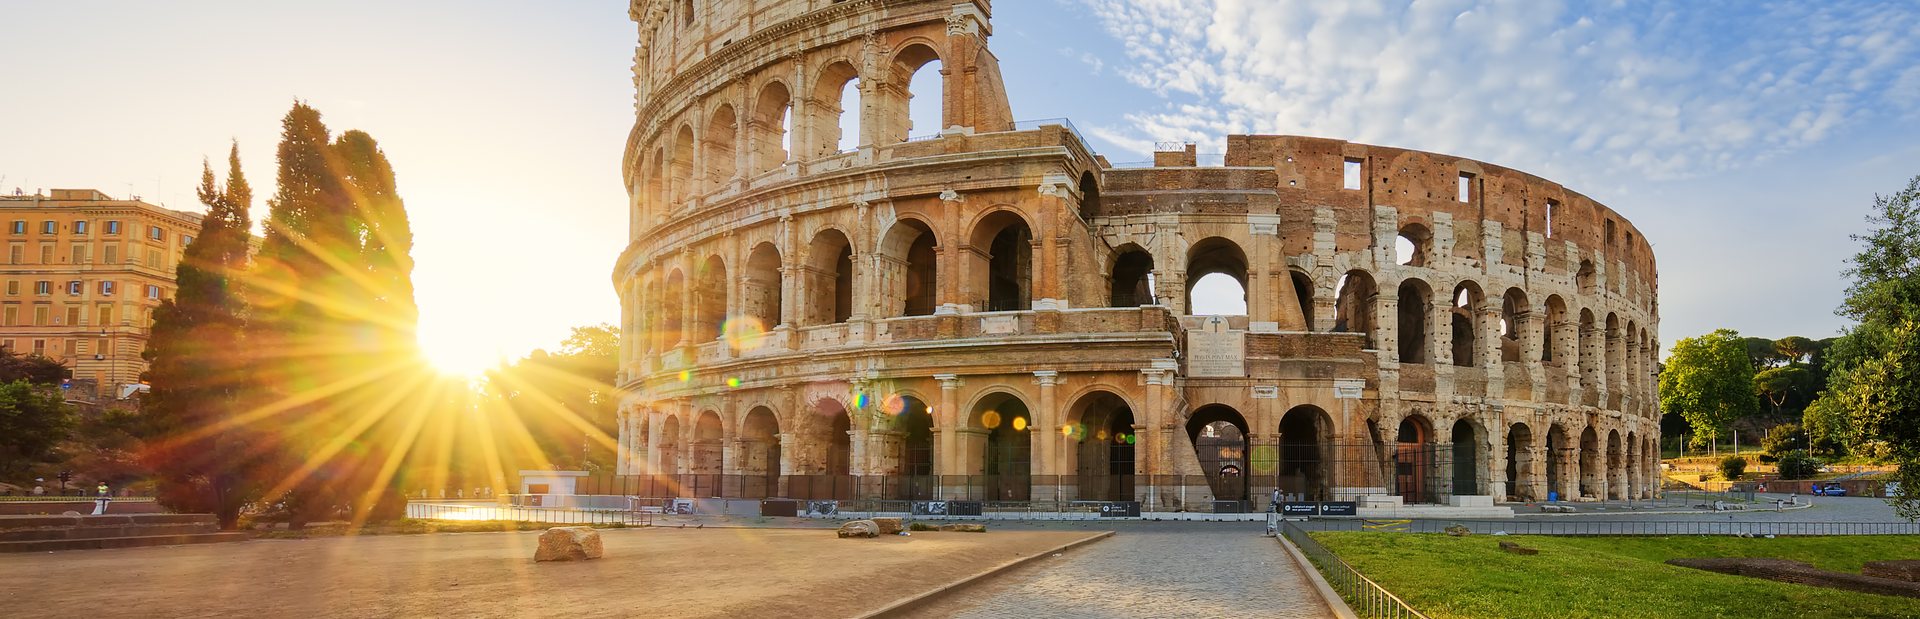 The Colosseum Image 1